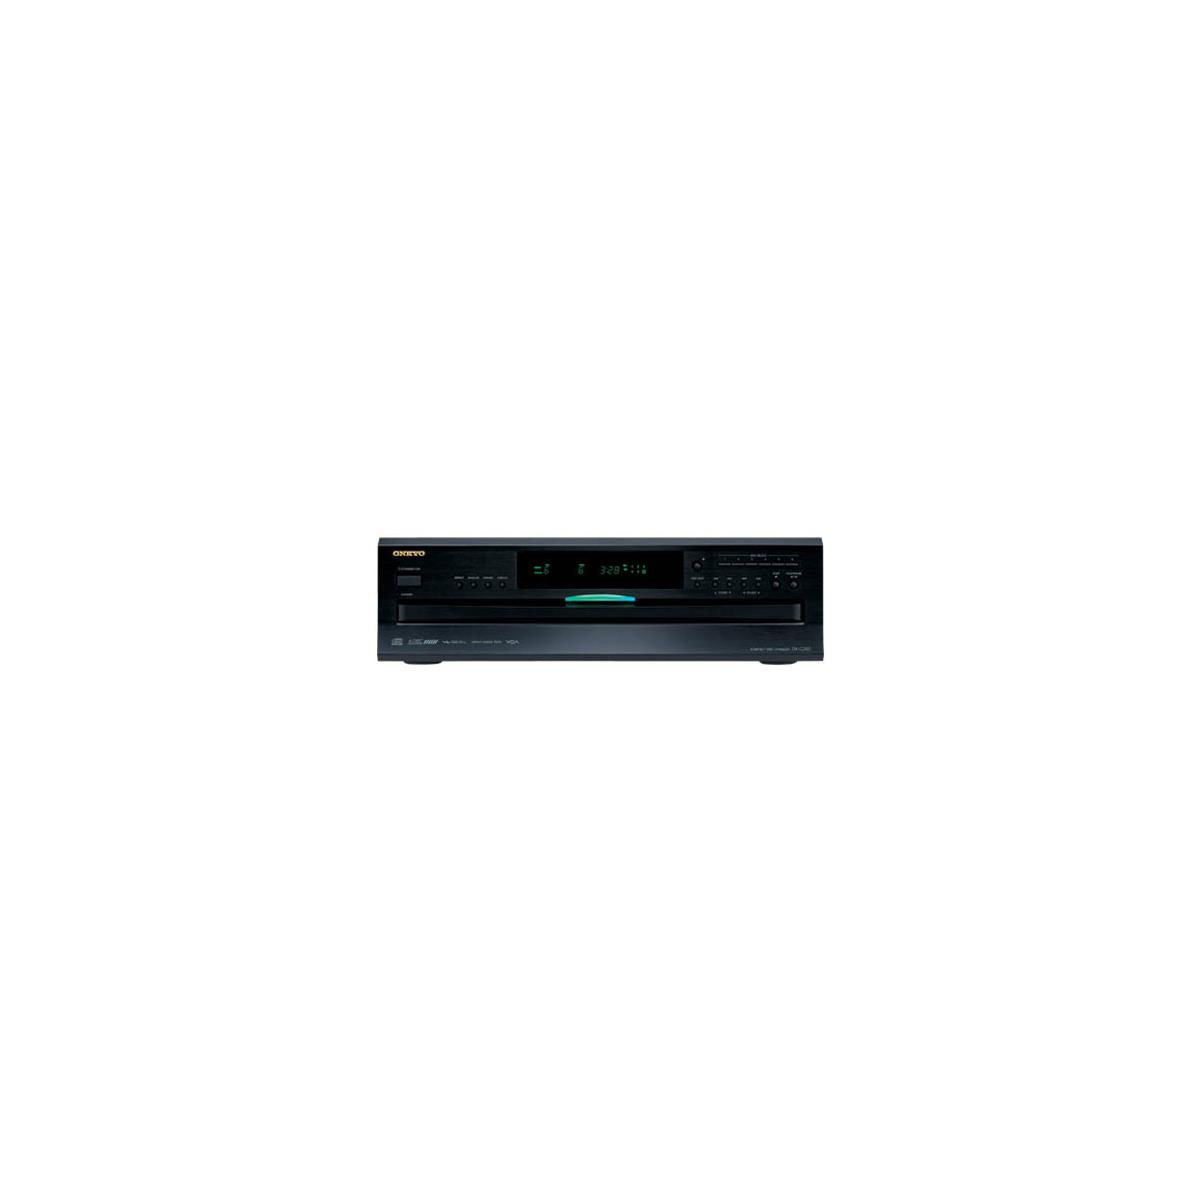 Image of ONA Onkyo DX-C390 6-Disc CD Carousel Changer with MP3 CD Playback